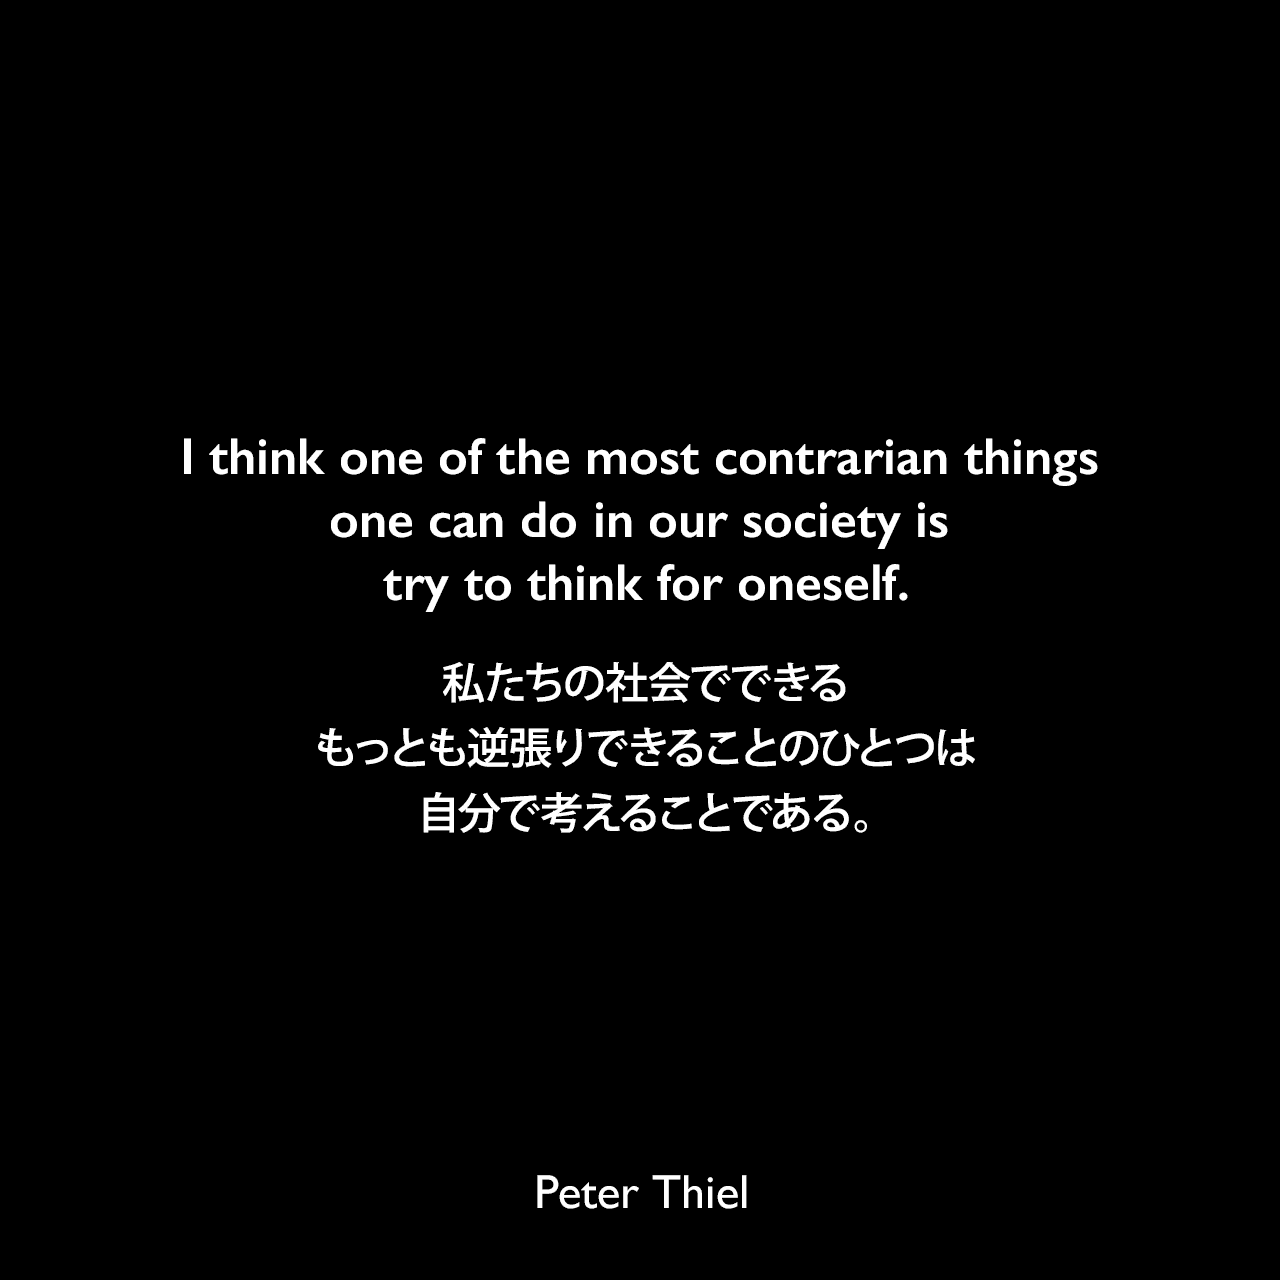 I think one of the most contrarian things one can do in our society is try to think for oneself.私たちの社会でできるもっとも逆張りできることのひとつは、自分で考えることである。Peter Thiel